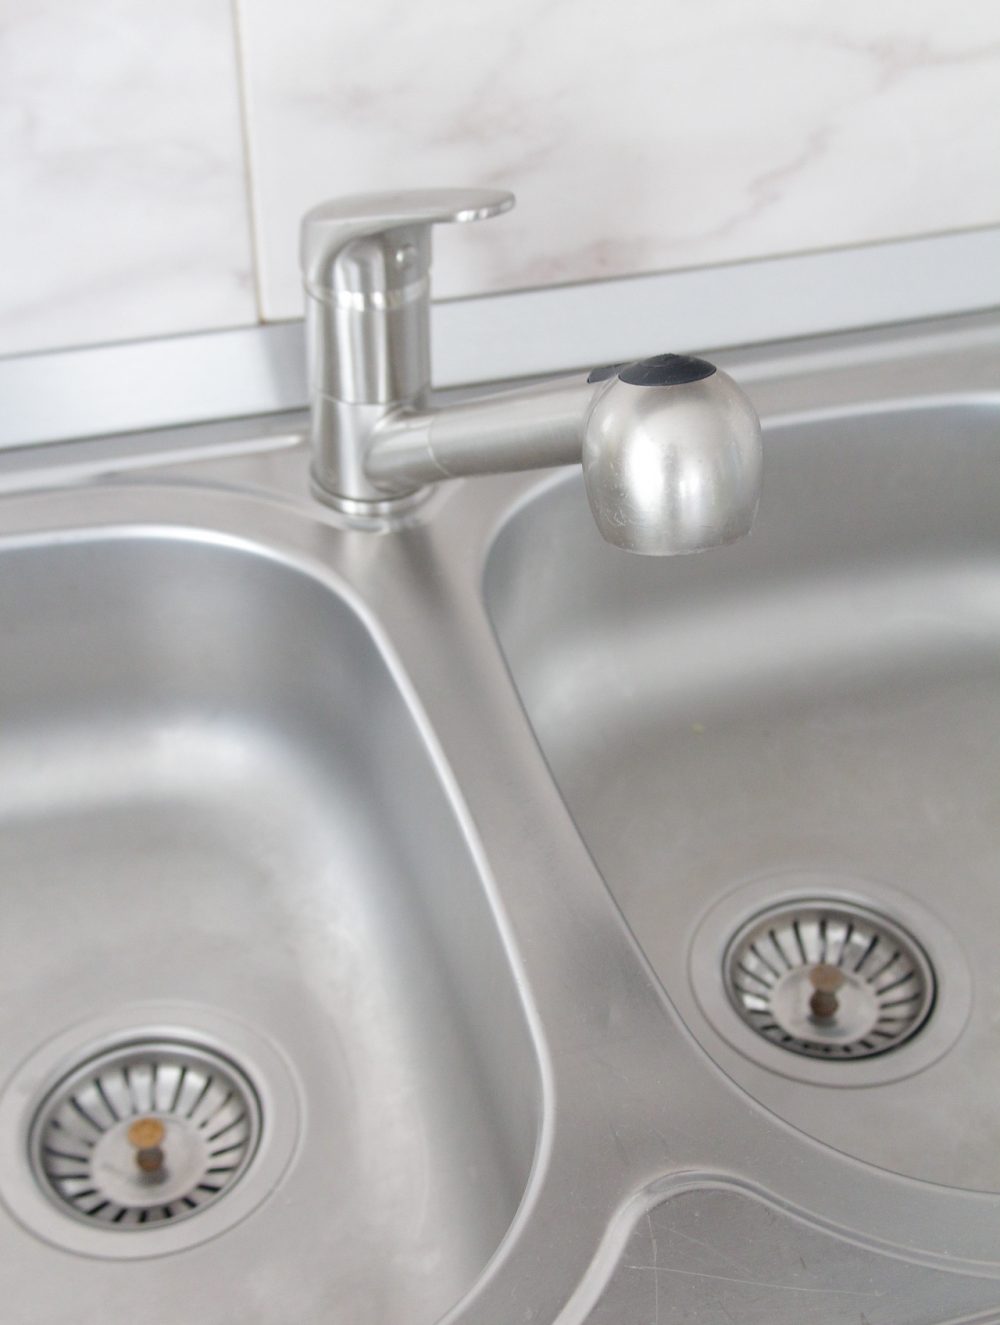 Best cleaner for stainless steel sink